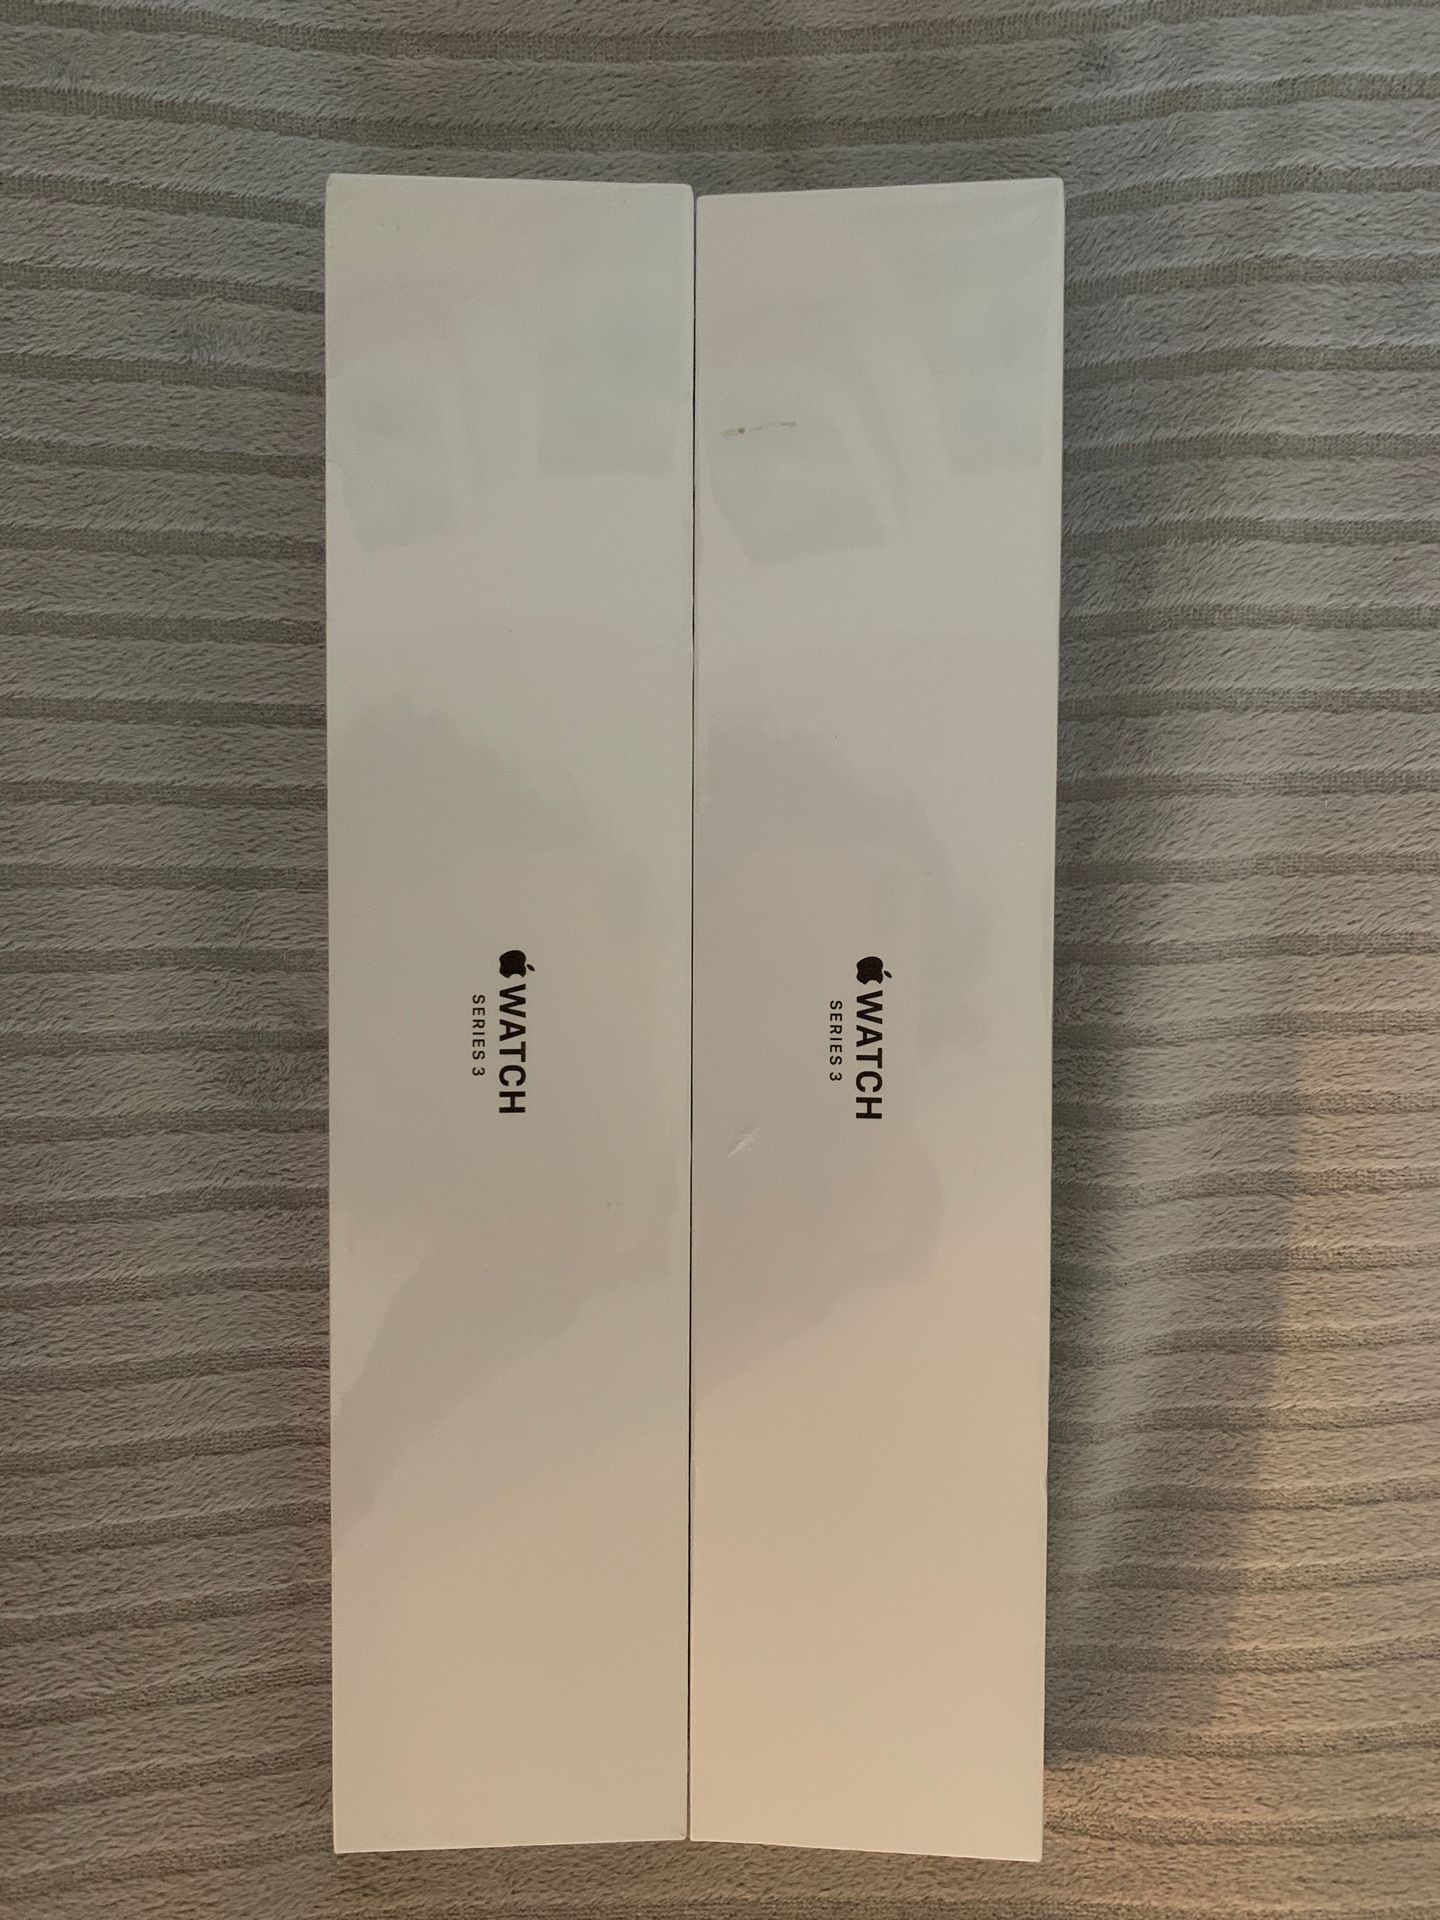 Apple Watch series 3, brand new, silver with white sport band